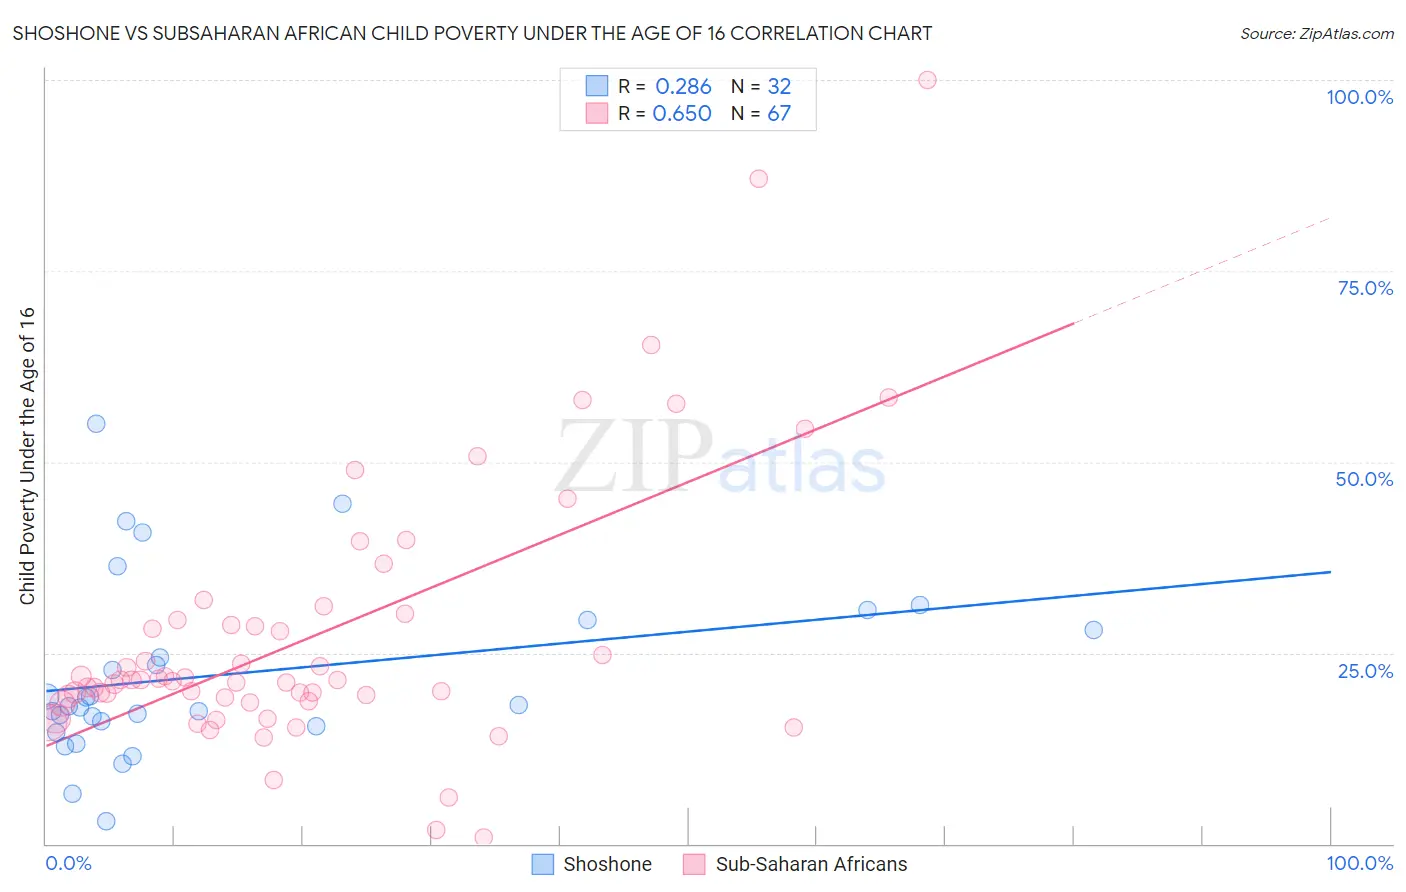 Shoshone vs Subsaharan African Child Poverty Under the Age of 16